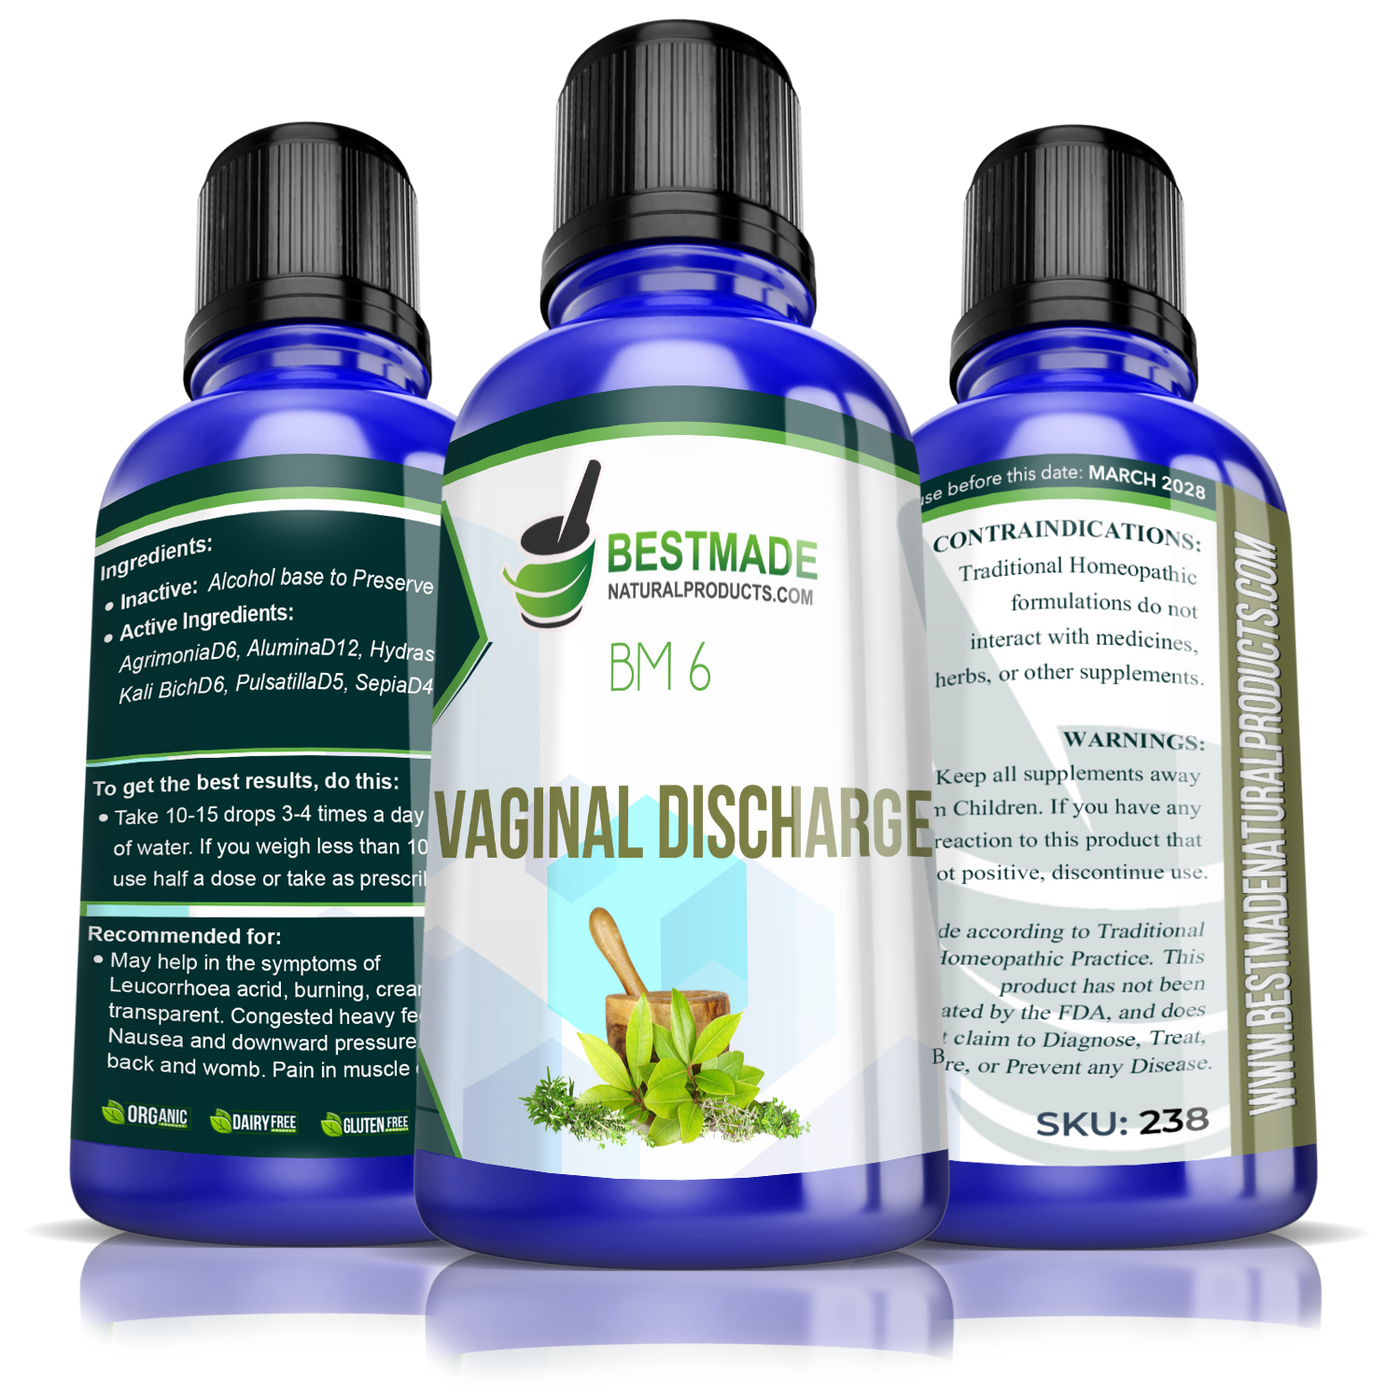 Bestmade Natural Products Vaginal Discharge Natural Remedy 0837